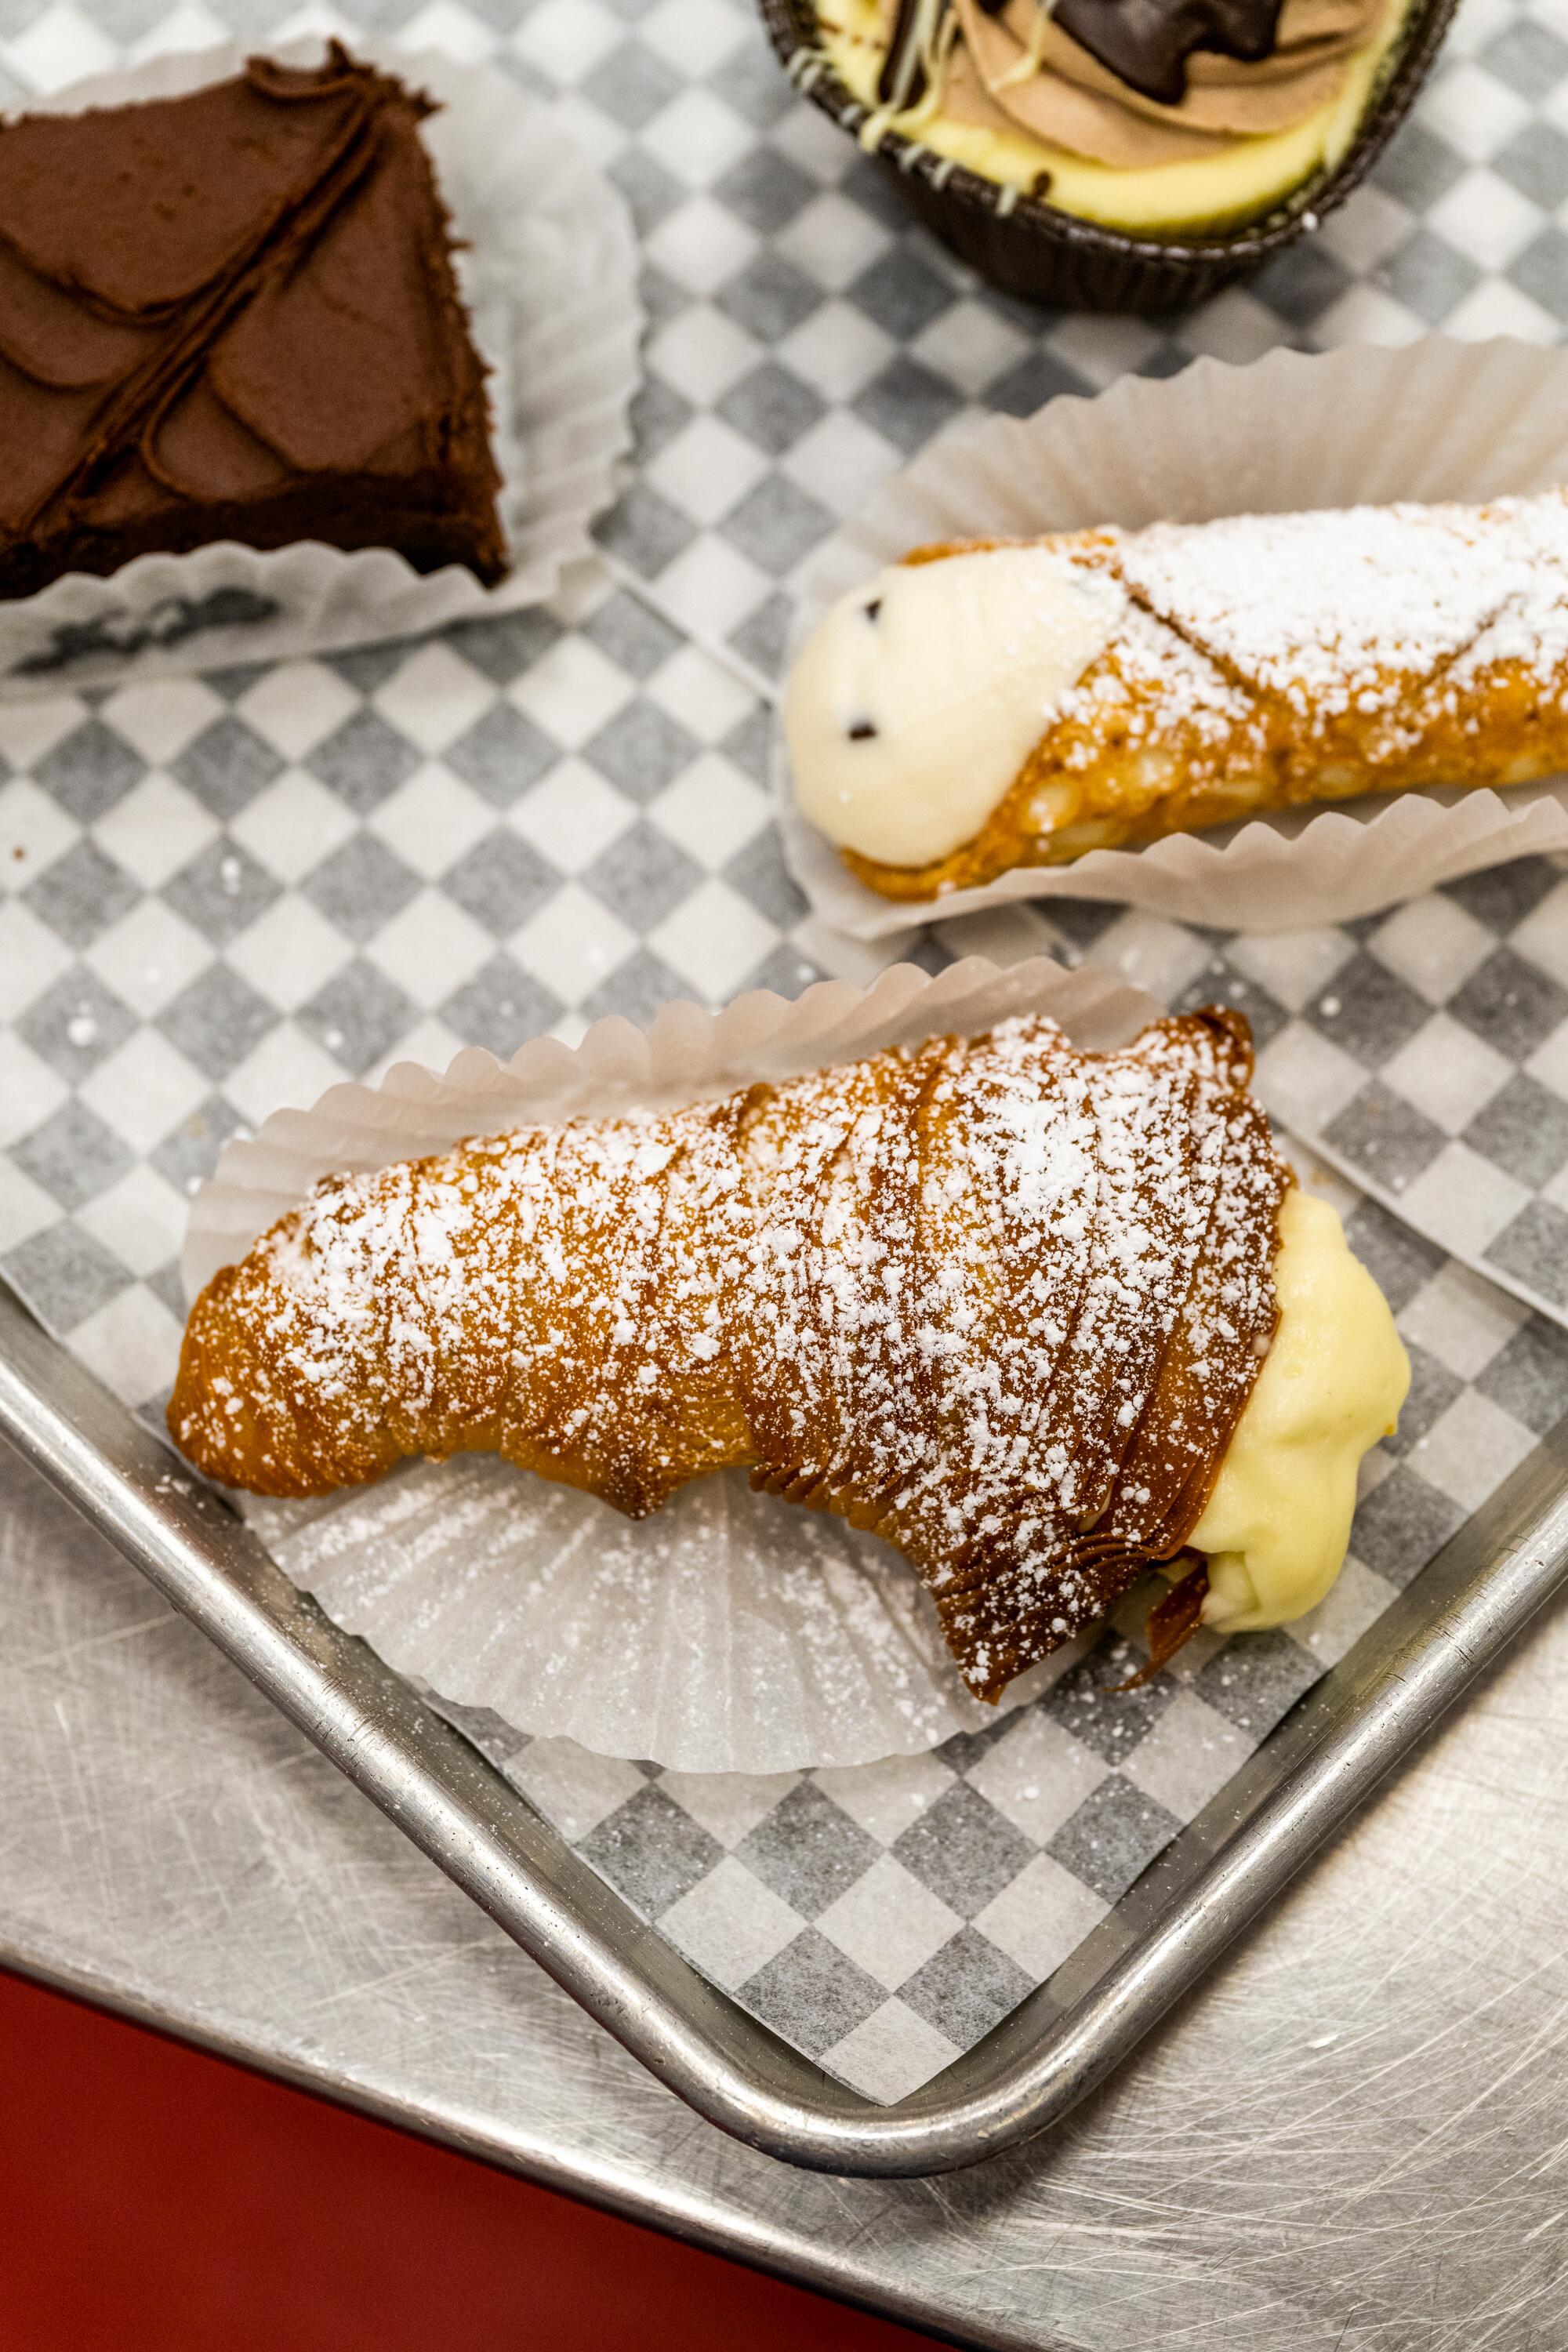 A traditional lobster tail, filled with Carlo's Bakery's French cream.